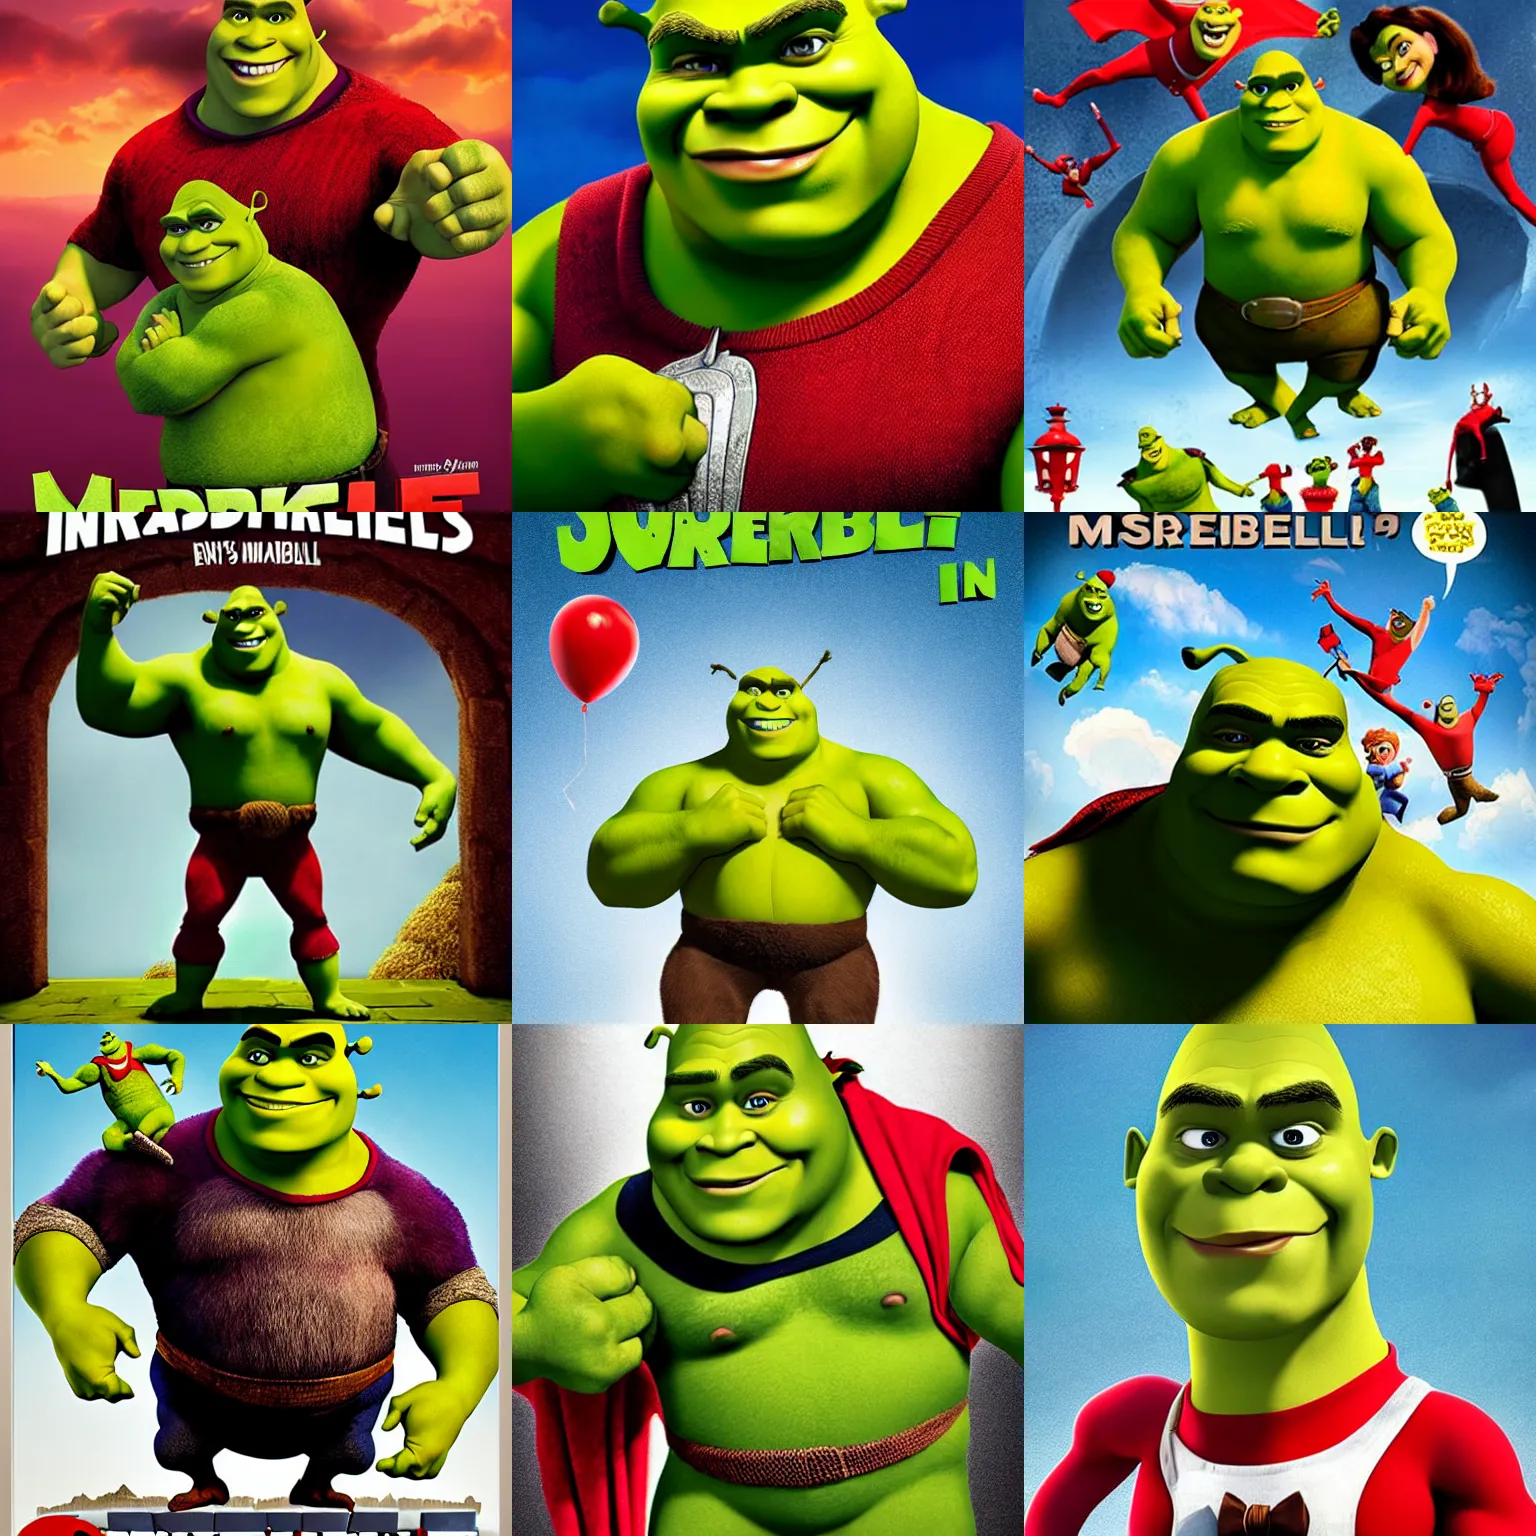 Prompt: shrek as mr. incredible from the incredibles. promotional movie poster by dreamworks